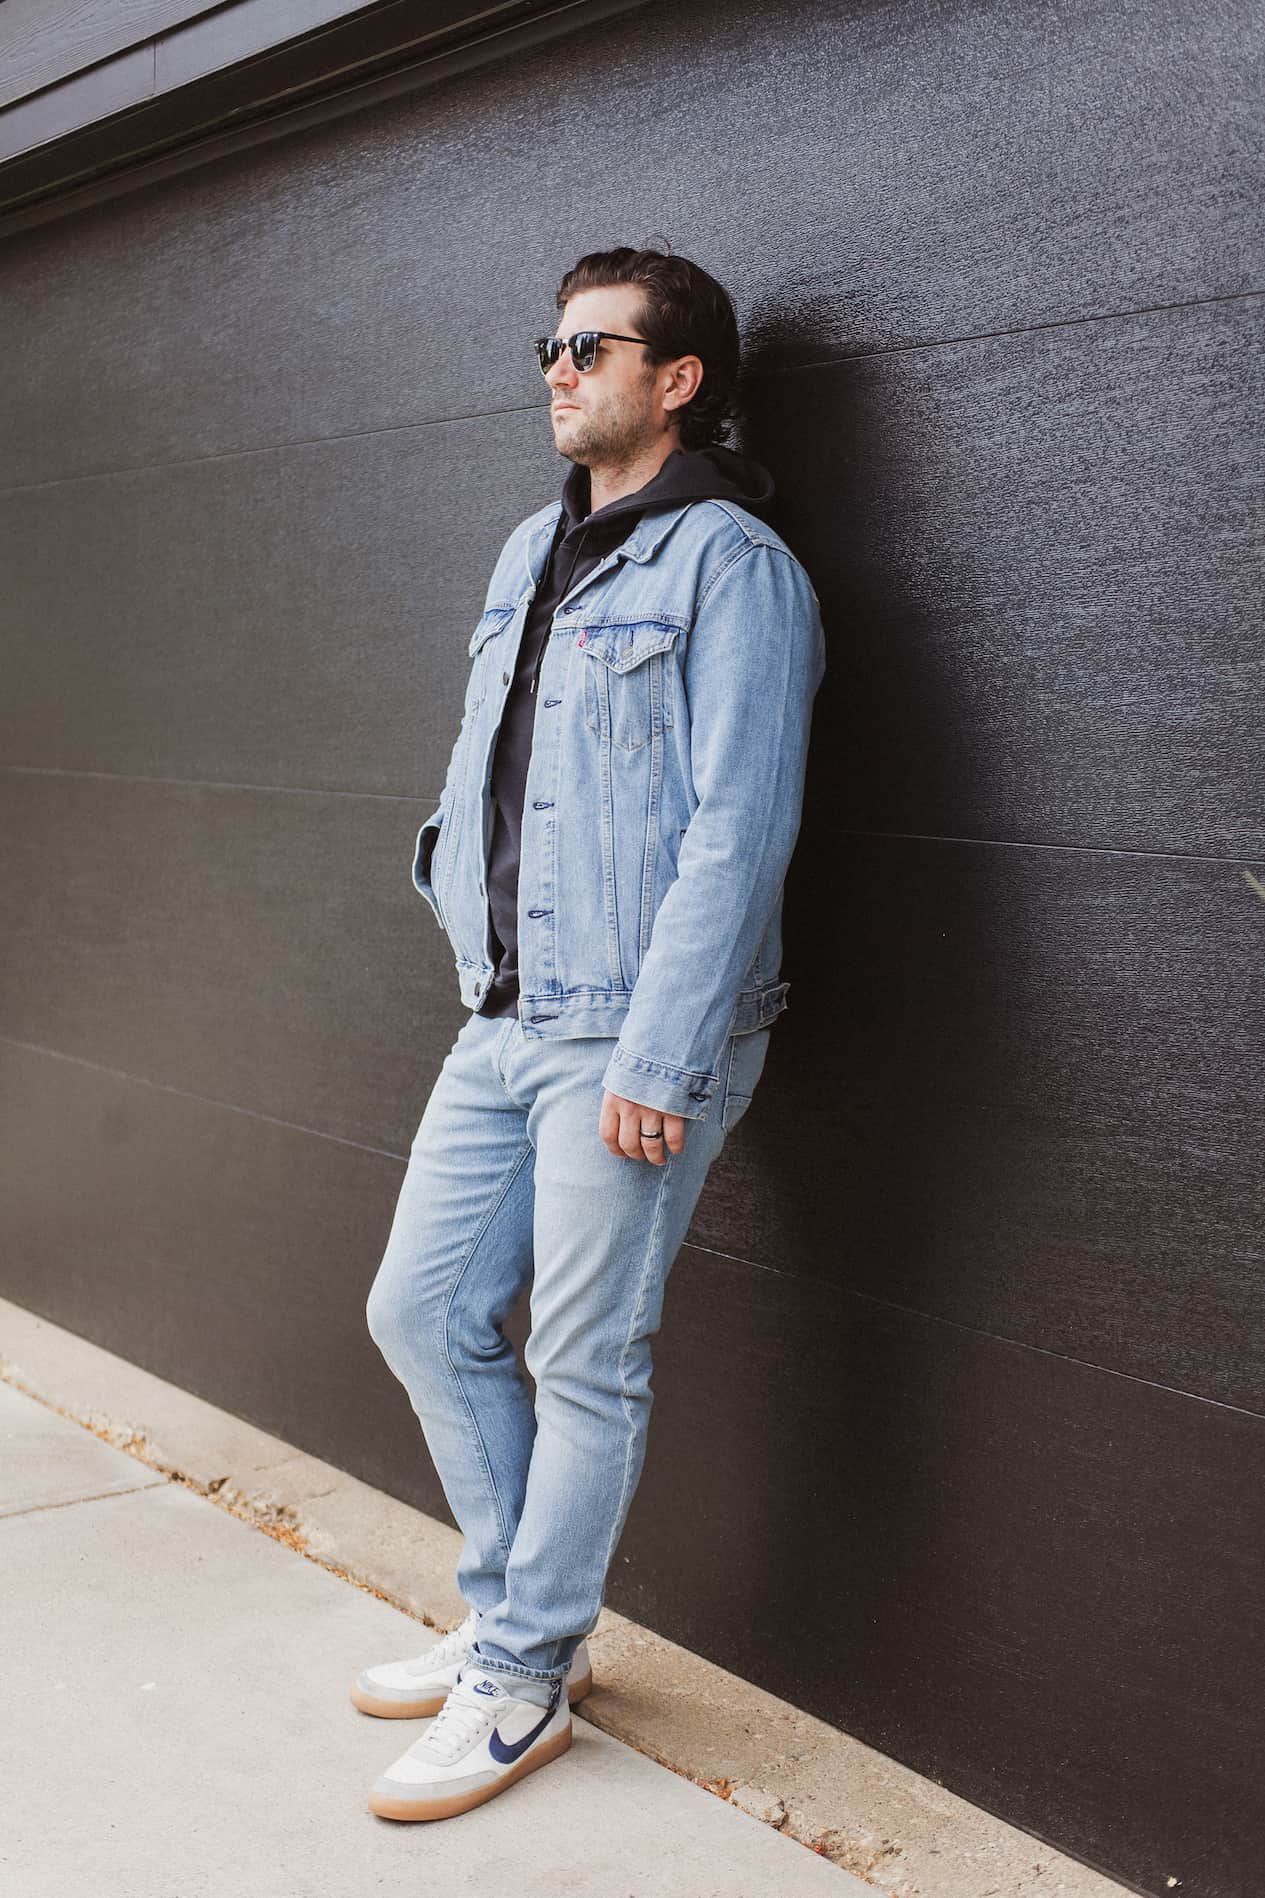 image of a man leaning against a black garage door wearing a denim jacket, black hoodie, light blue jeans, and white sneakers